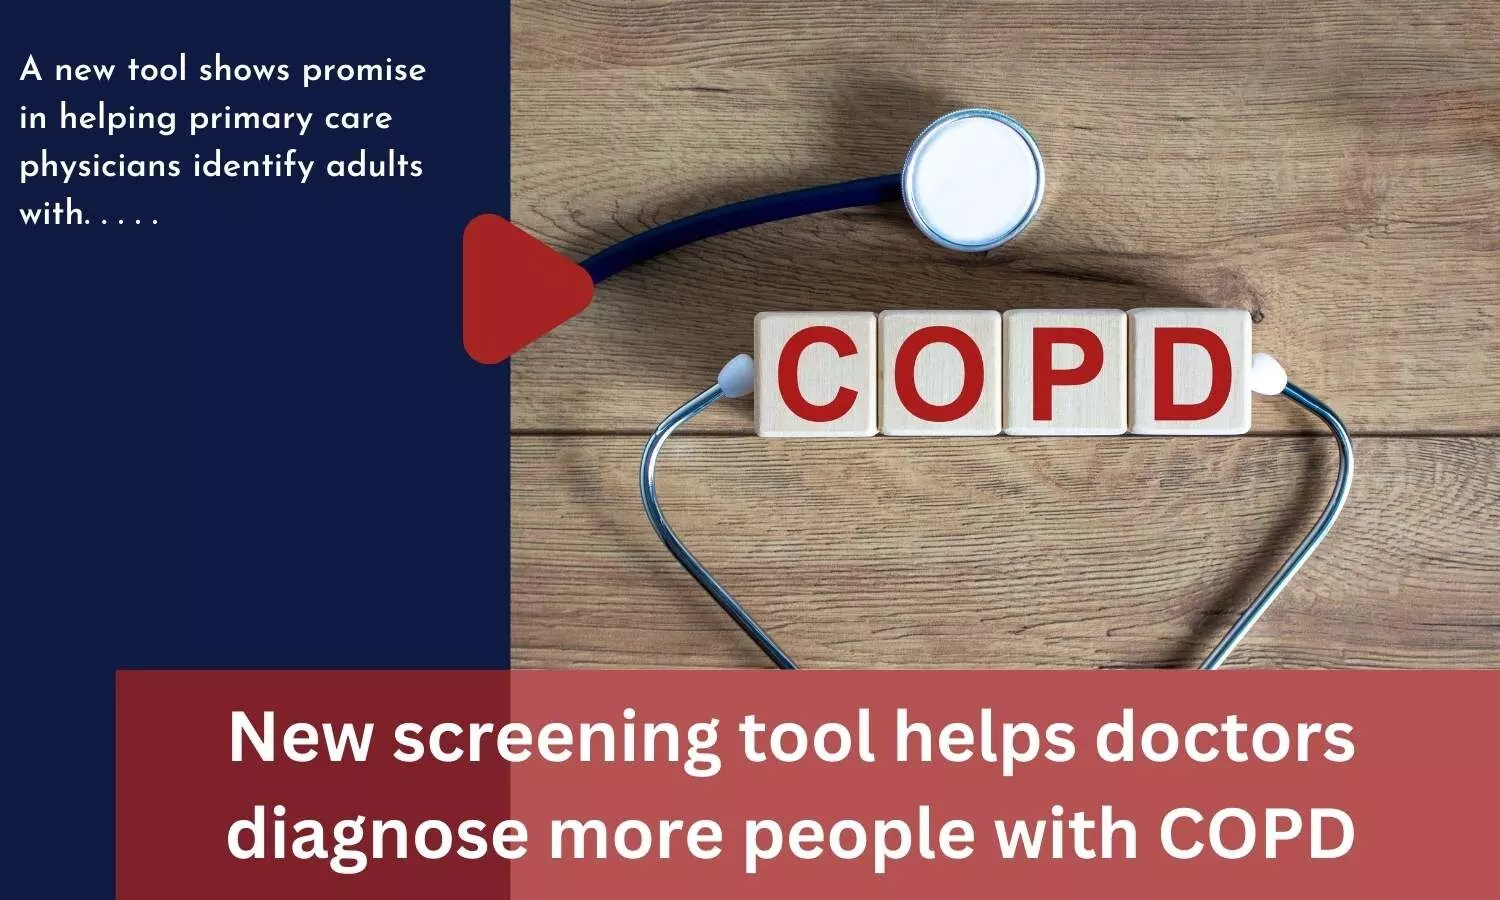 New screening tool helps doctors diagnose more people with COPD